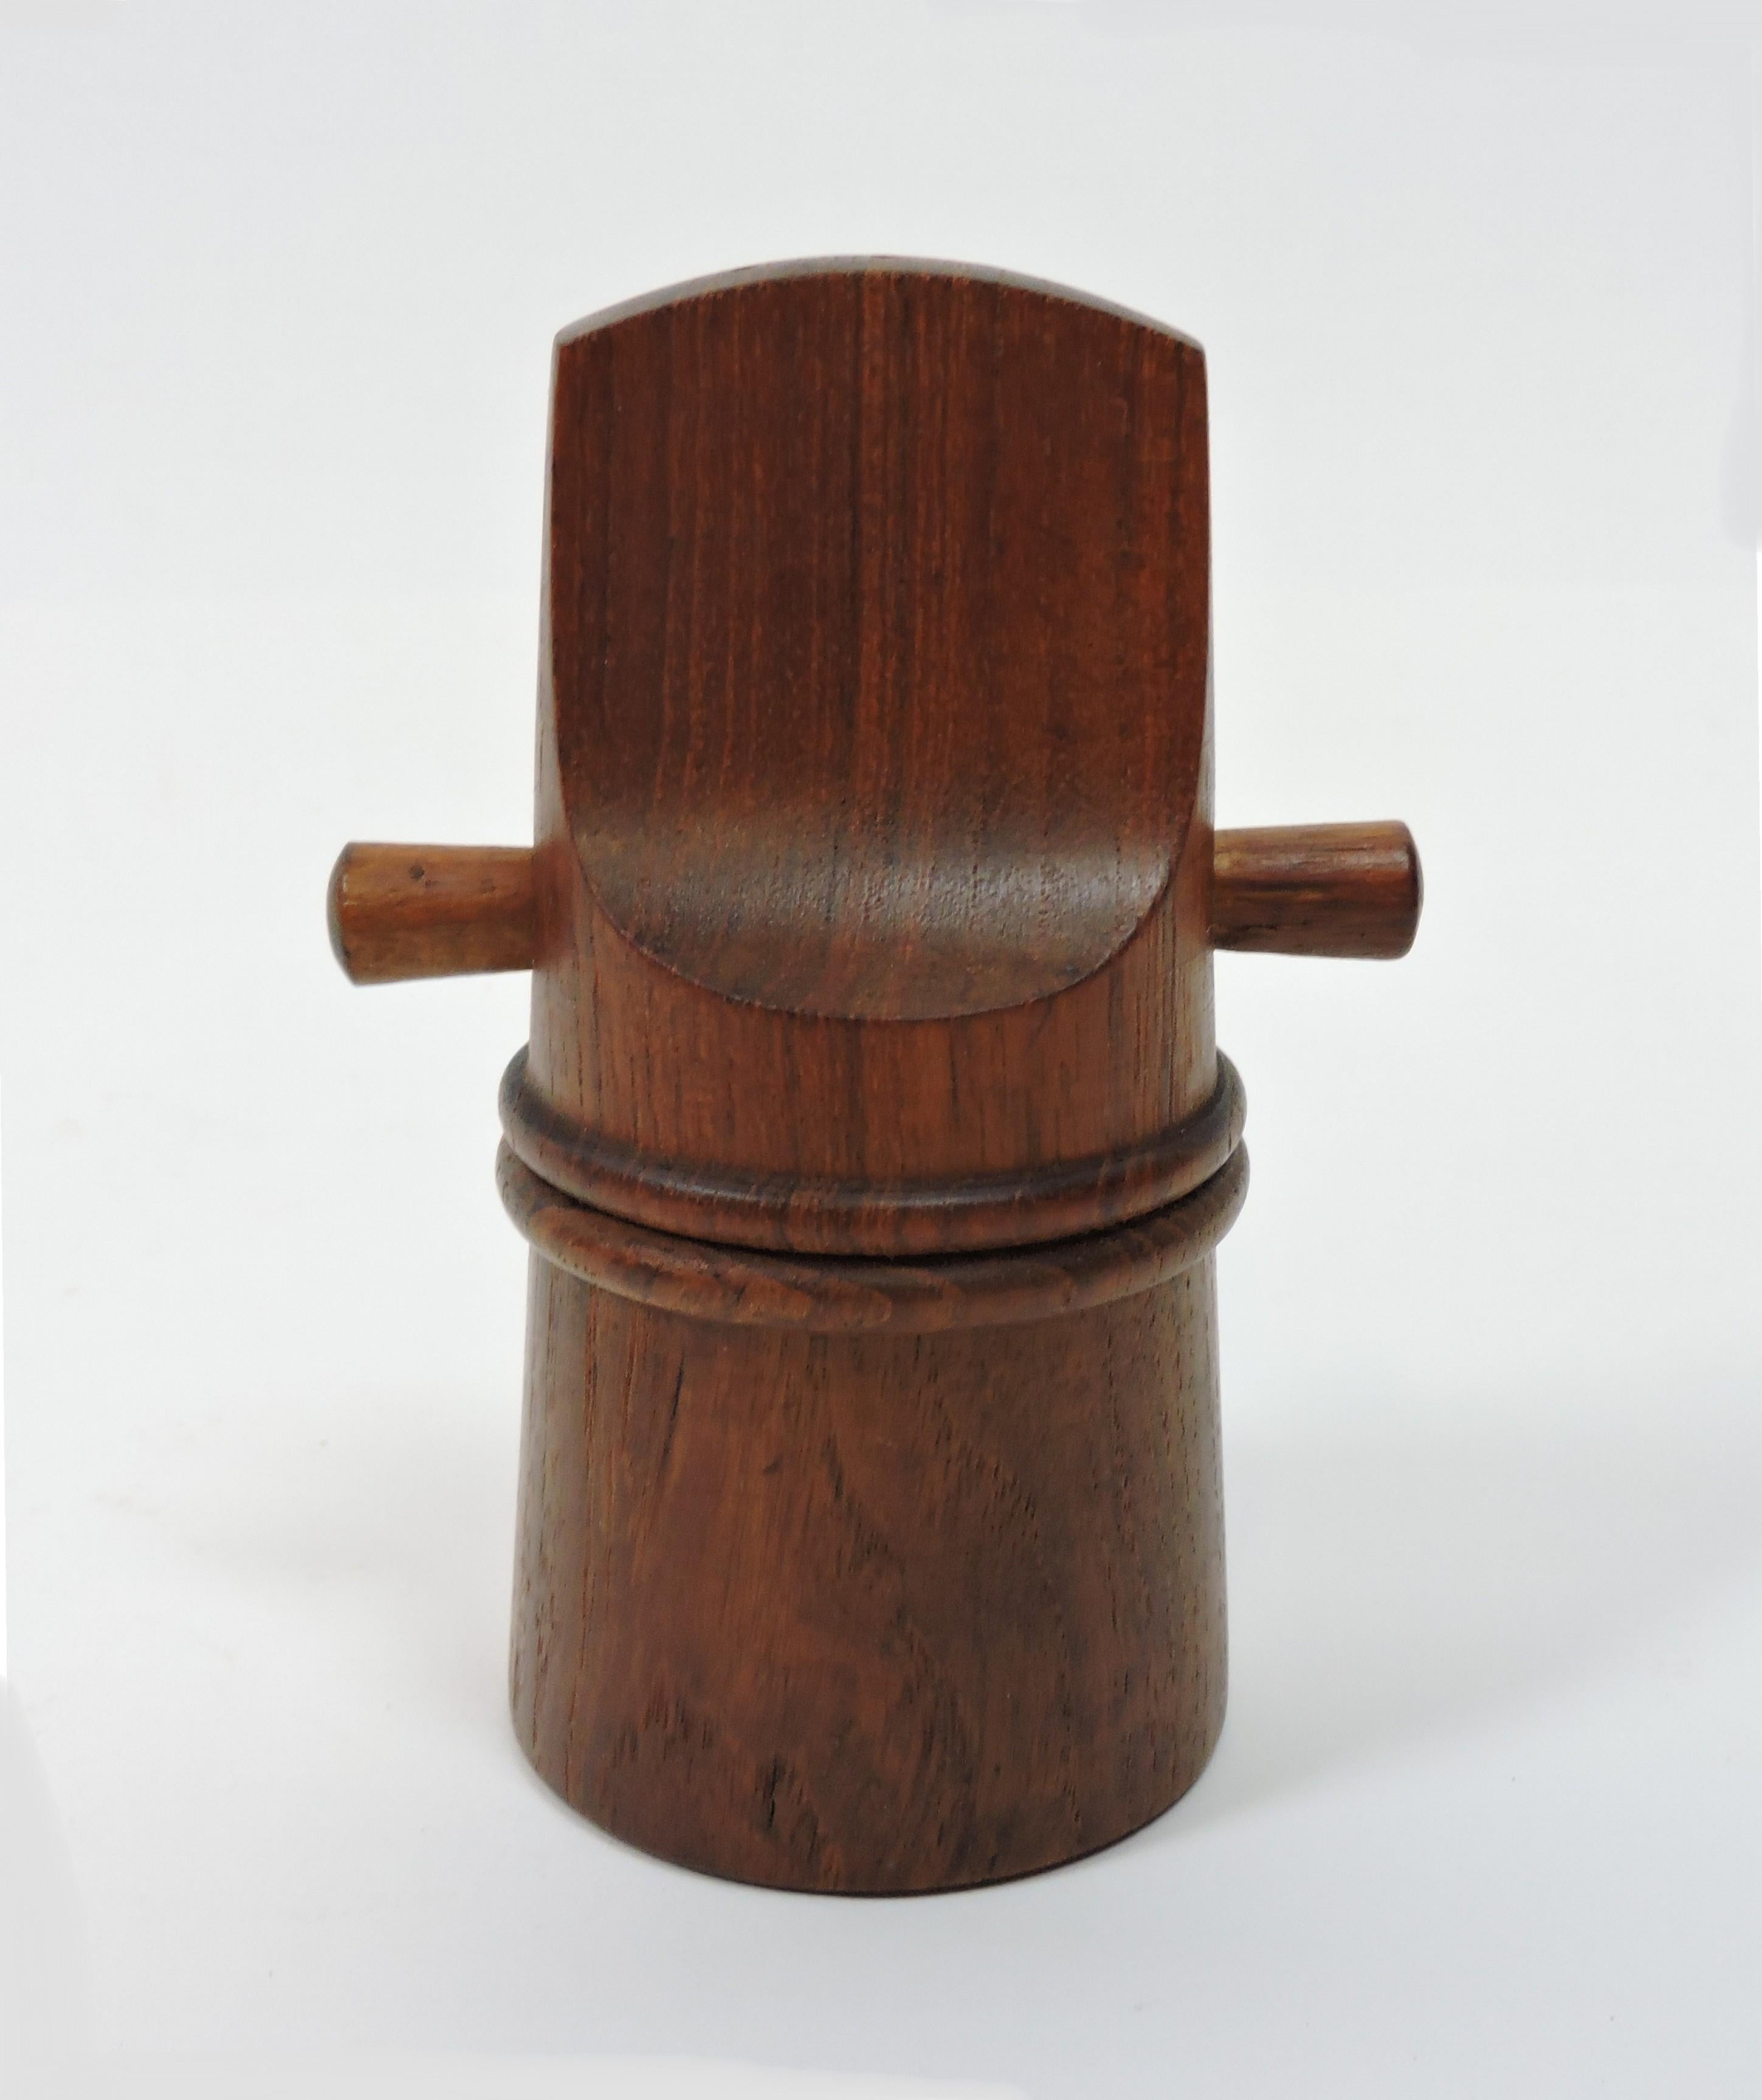 Dansk salt shaker/peppermill combo, model #834, designed by Jens Quistgaard and made by Dansk. This mill is made of teak and has two plugs in the top that can be removed for filling with salt, and turning the bottom lines up the opening for filling